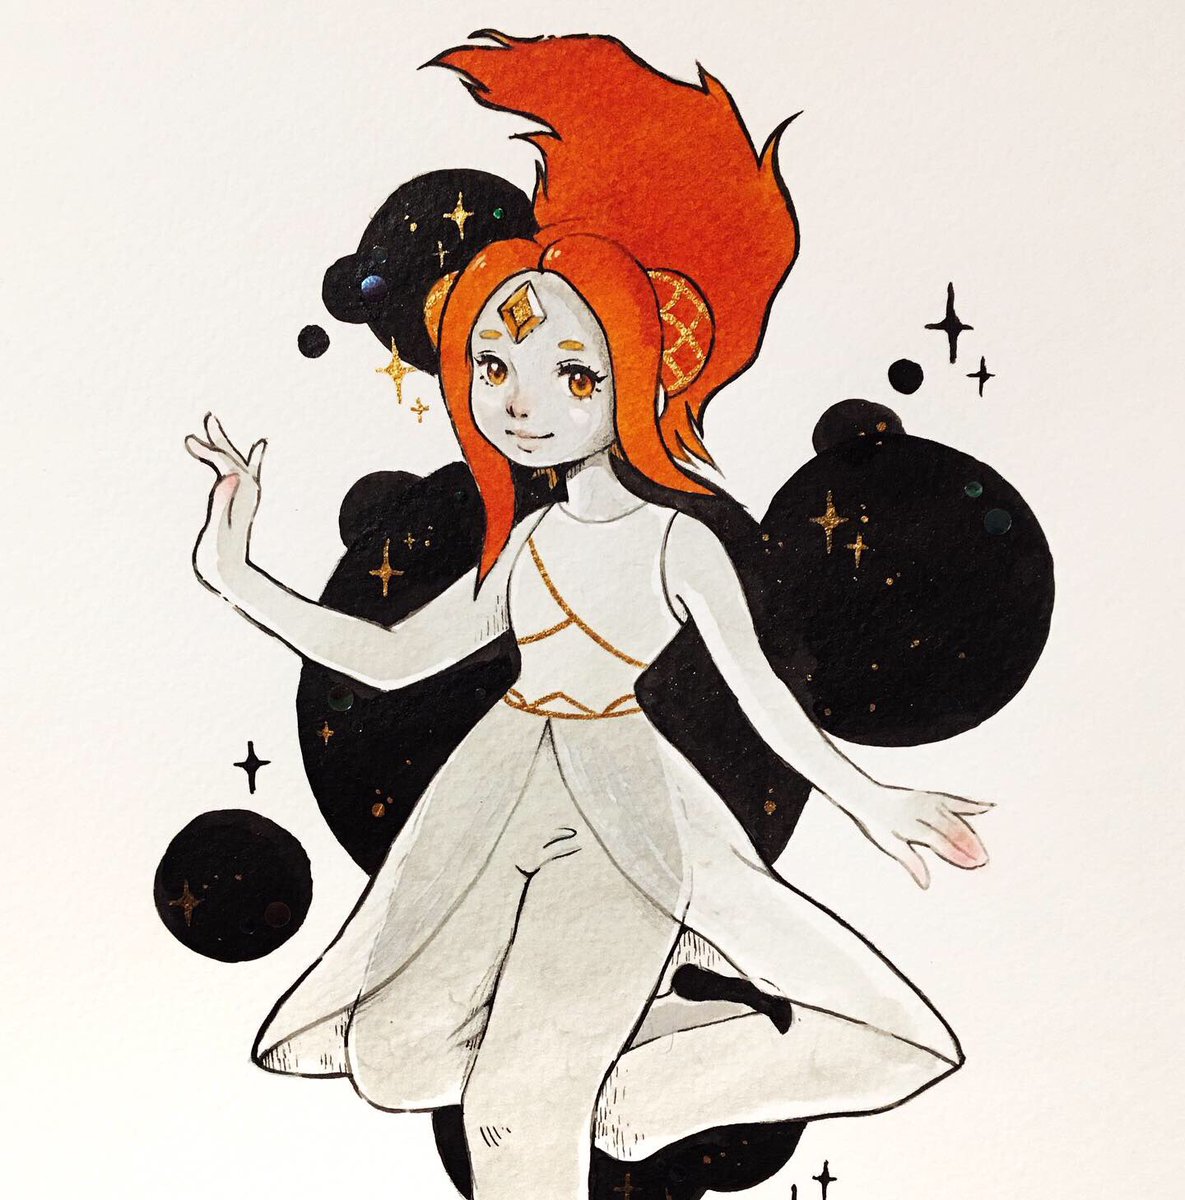 Chilltober #01: Fire

Hey guys! I decided to go for #chilltober2019 this year. I’m trying to use inks as main technique. She is Flame Princess from adventure time.

#art #artwork #ink #chineseink #liquidwatercolor #traditionalart #mixtechnique #aventuretime #flameprincess